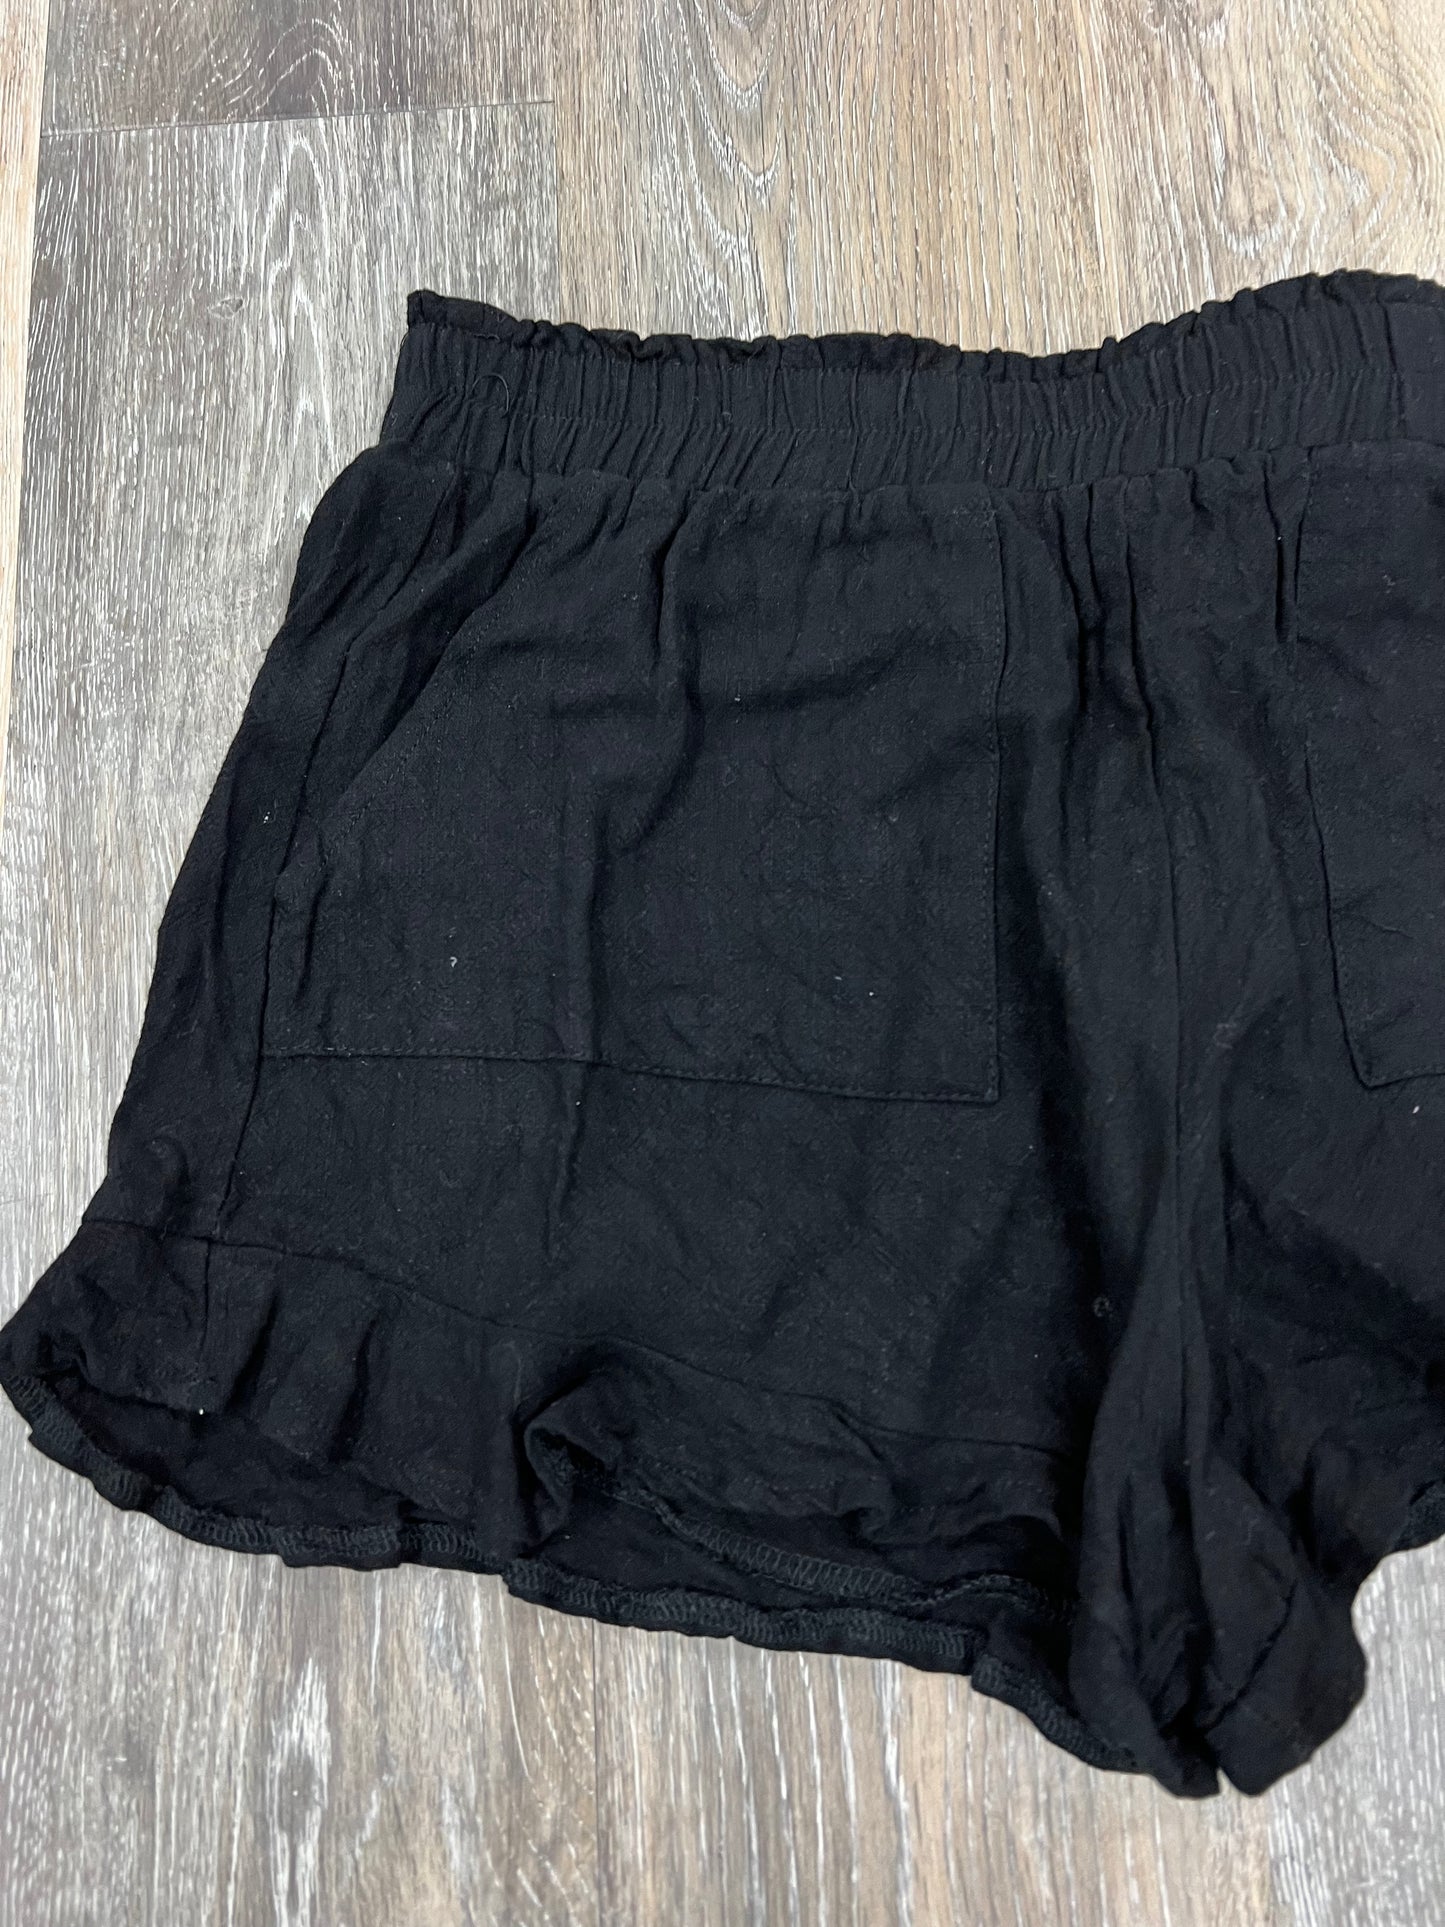 Shorts By Allie Rose  Size: M